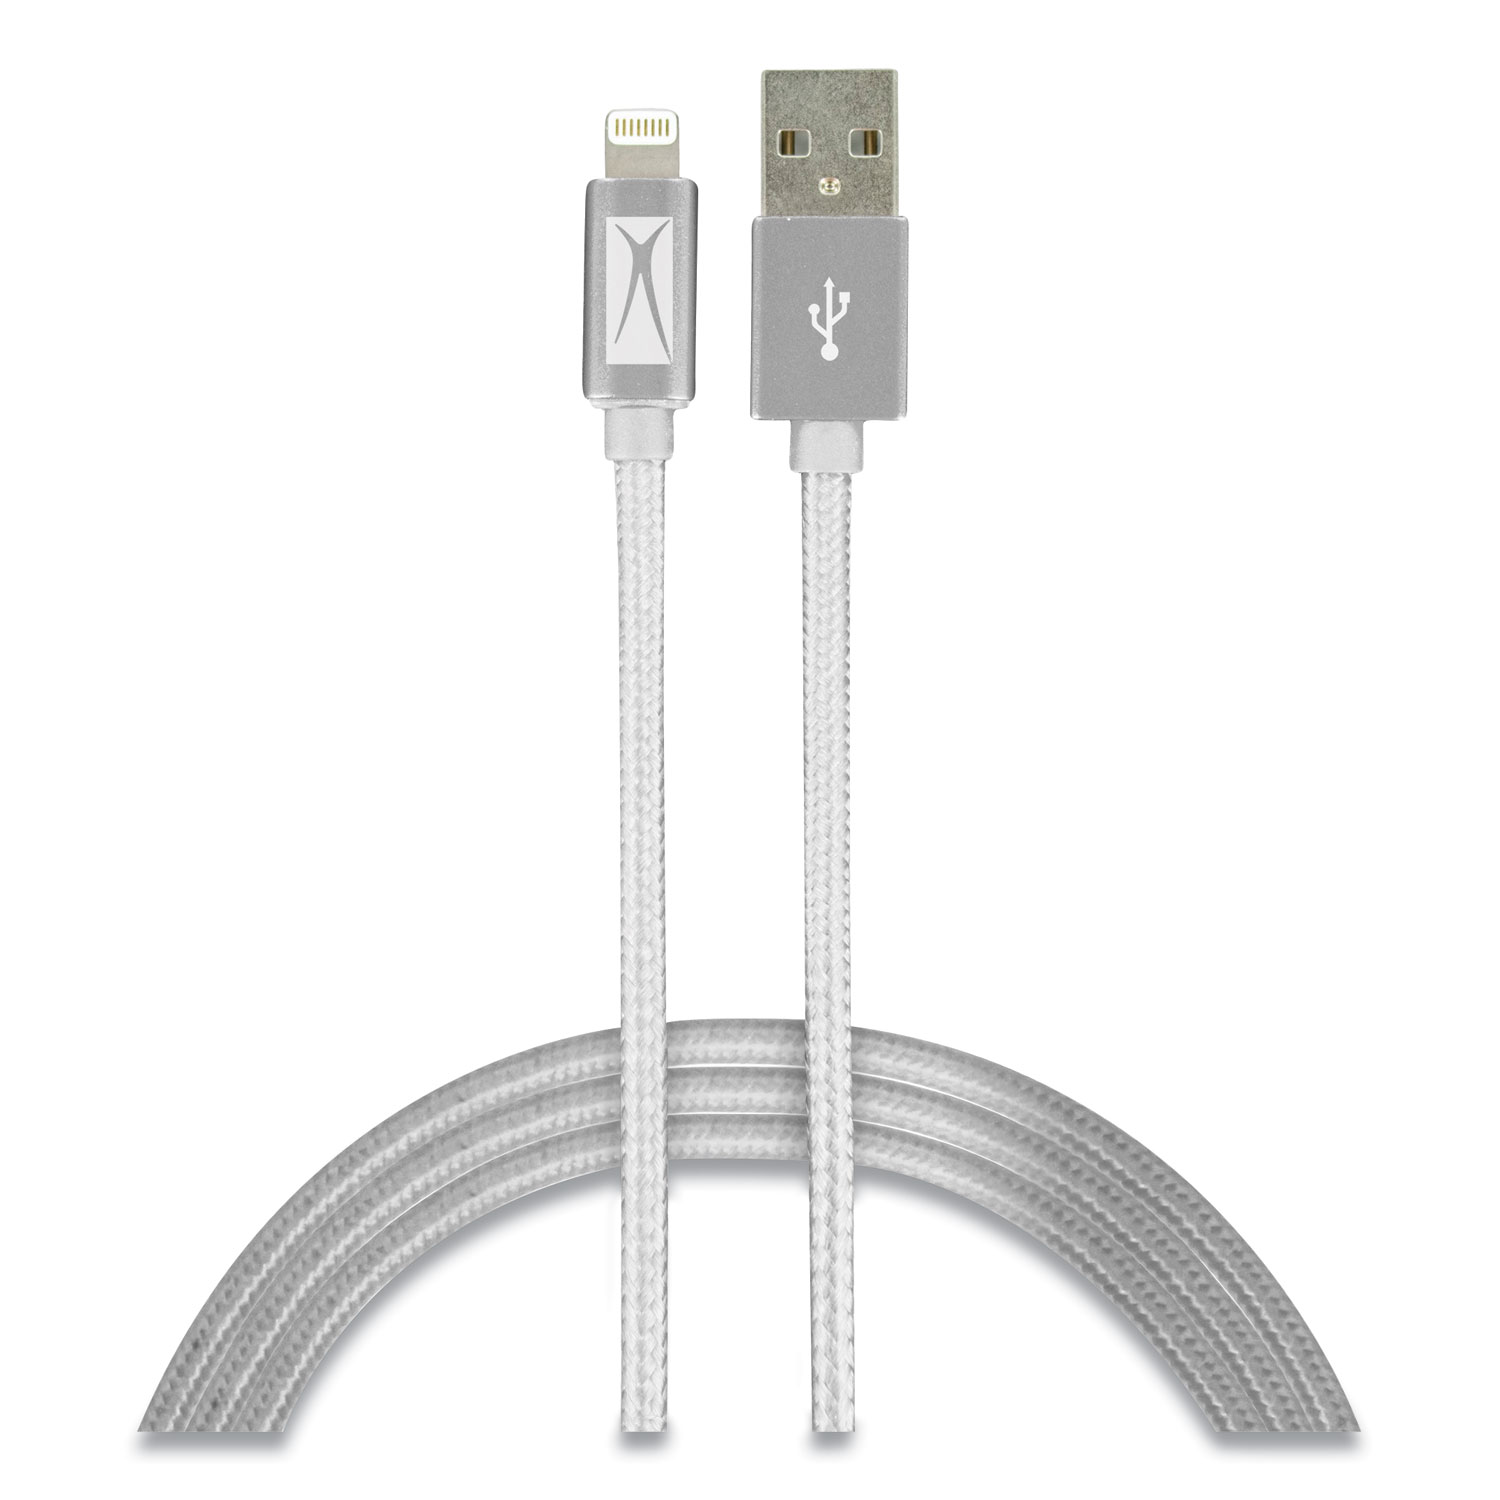 Altec Lansing® Fabric Lightning Charging Cable, 6 ft, White